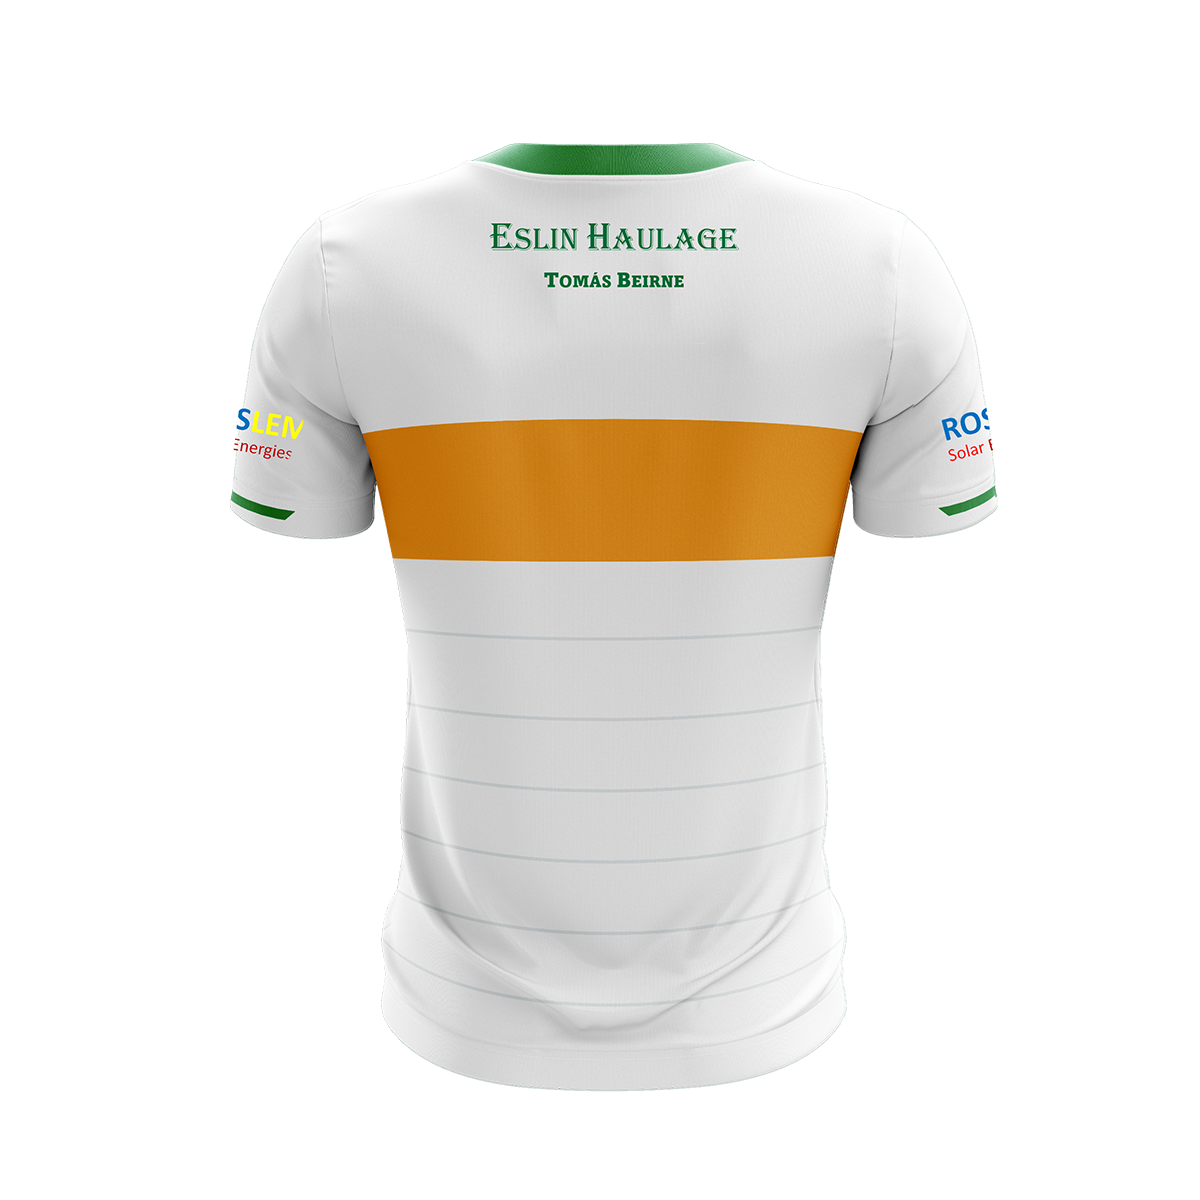 Mc Keever Leitrim Hurling Official Goalkeeper Jersey - Adult - White/Gold